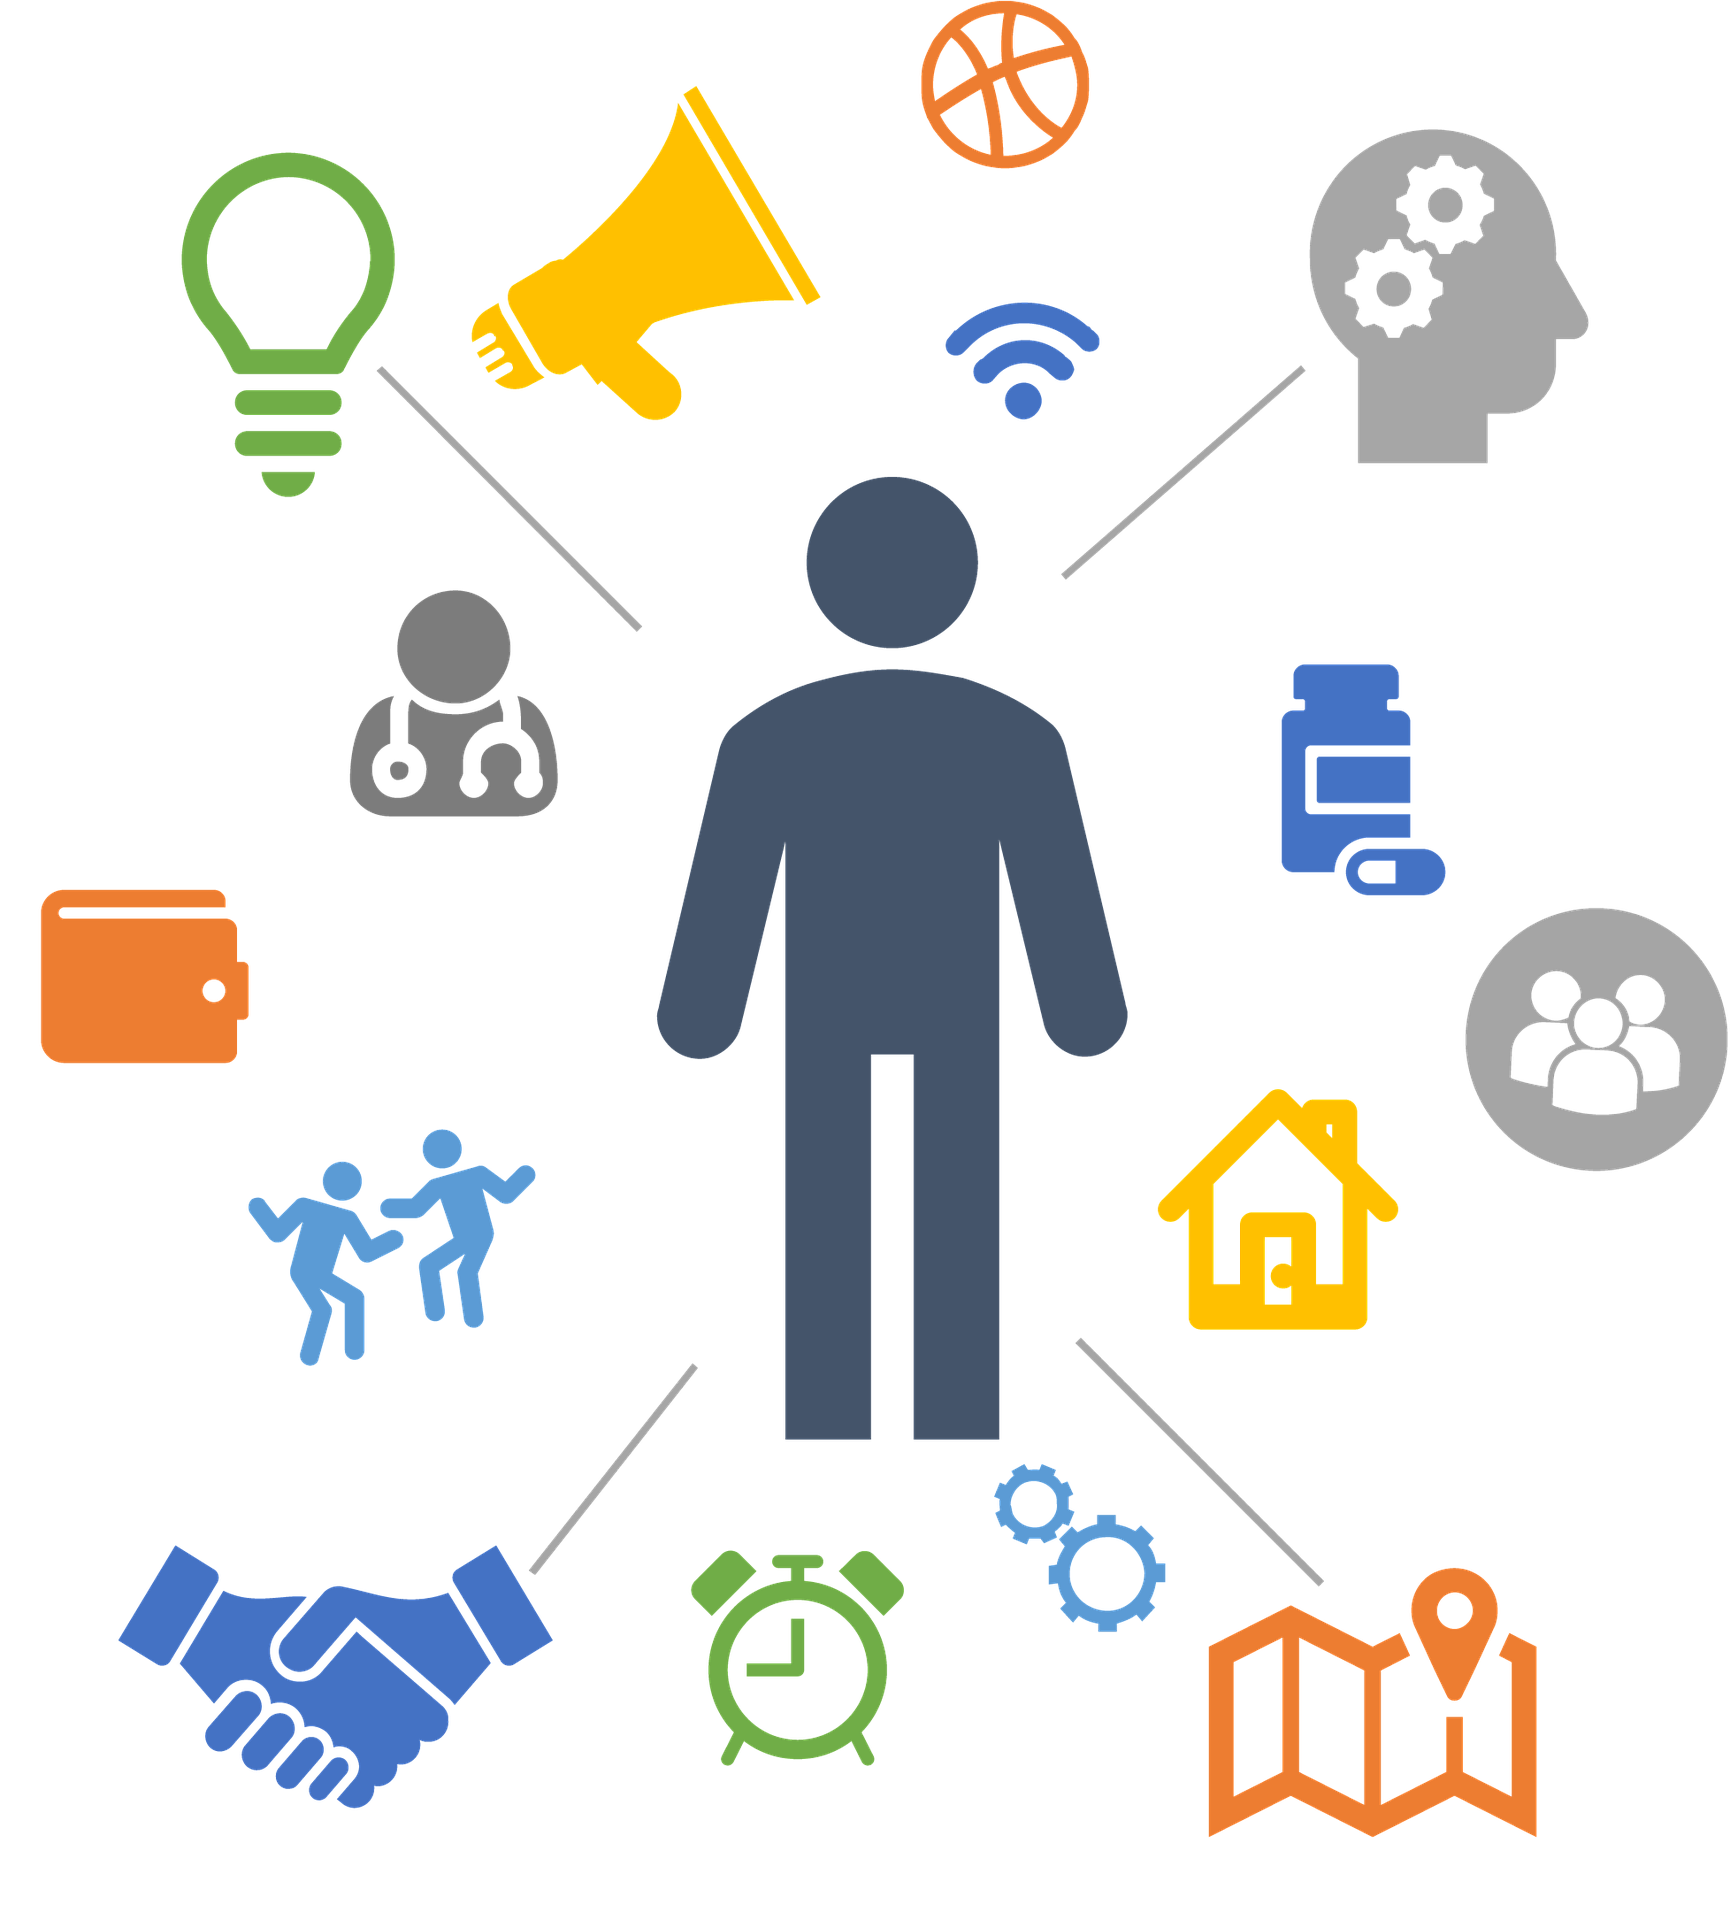 A stick person surrounded by icons representing barriers, such as sound and technology